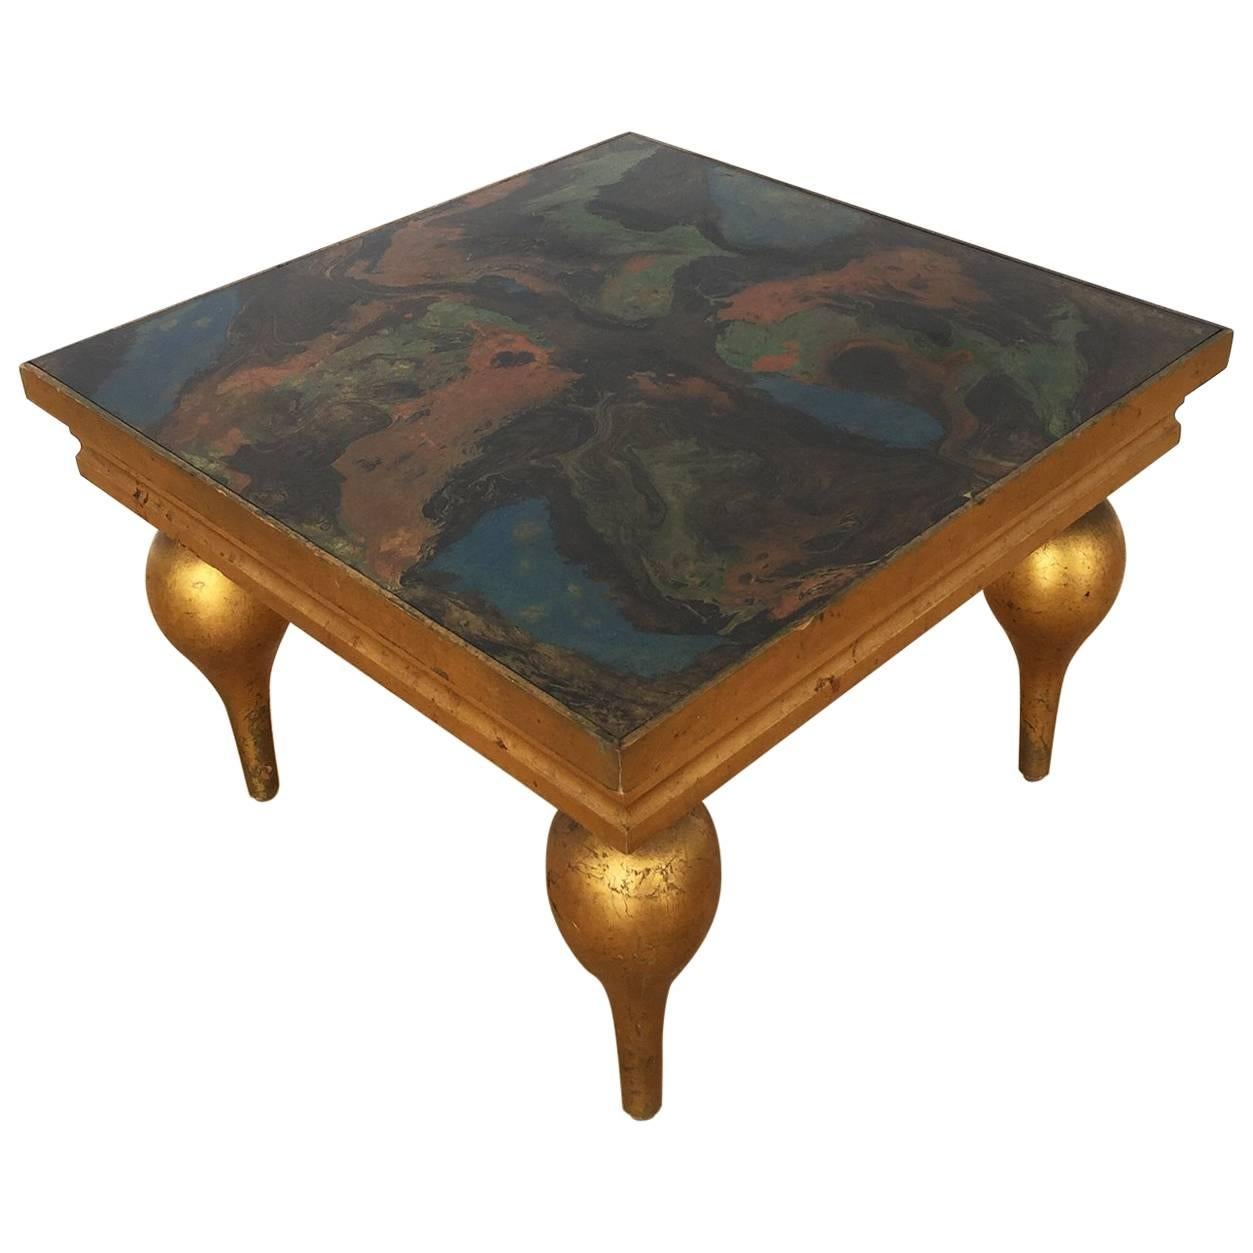 Midcentury Italian Giltwood Occasional Table with Marbleized Top, 1940s For Sale